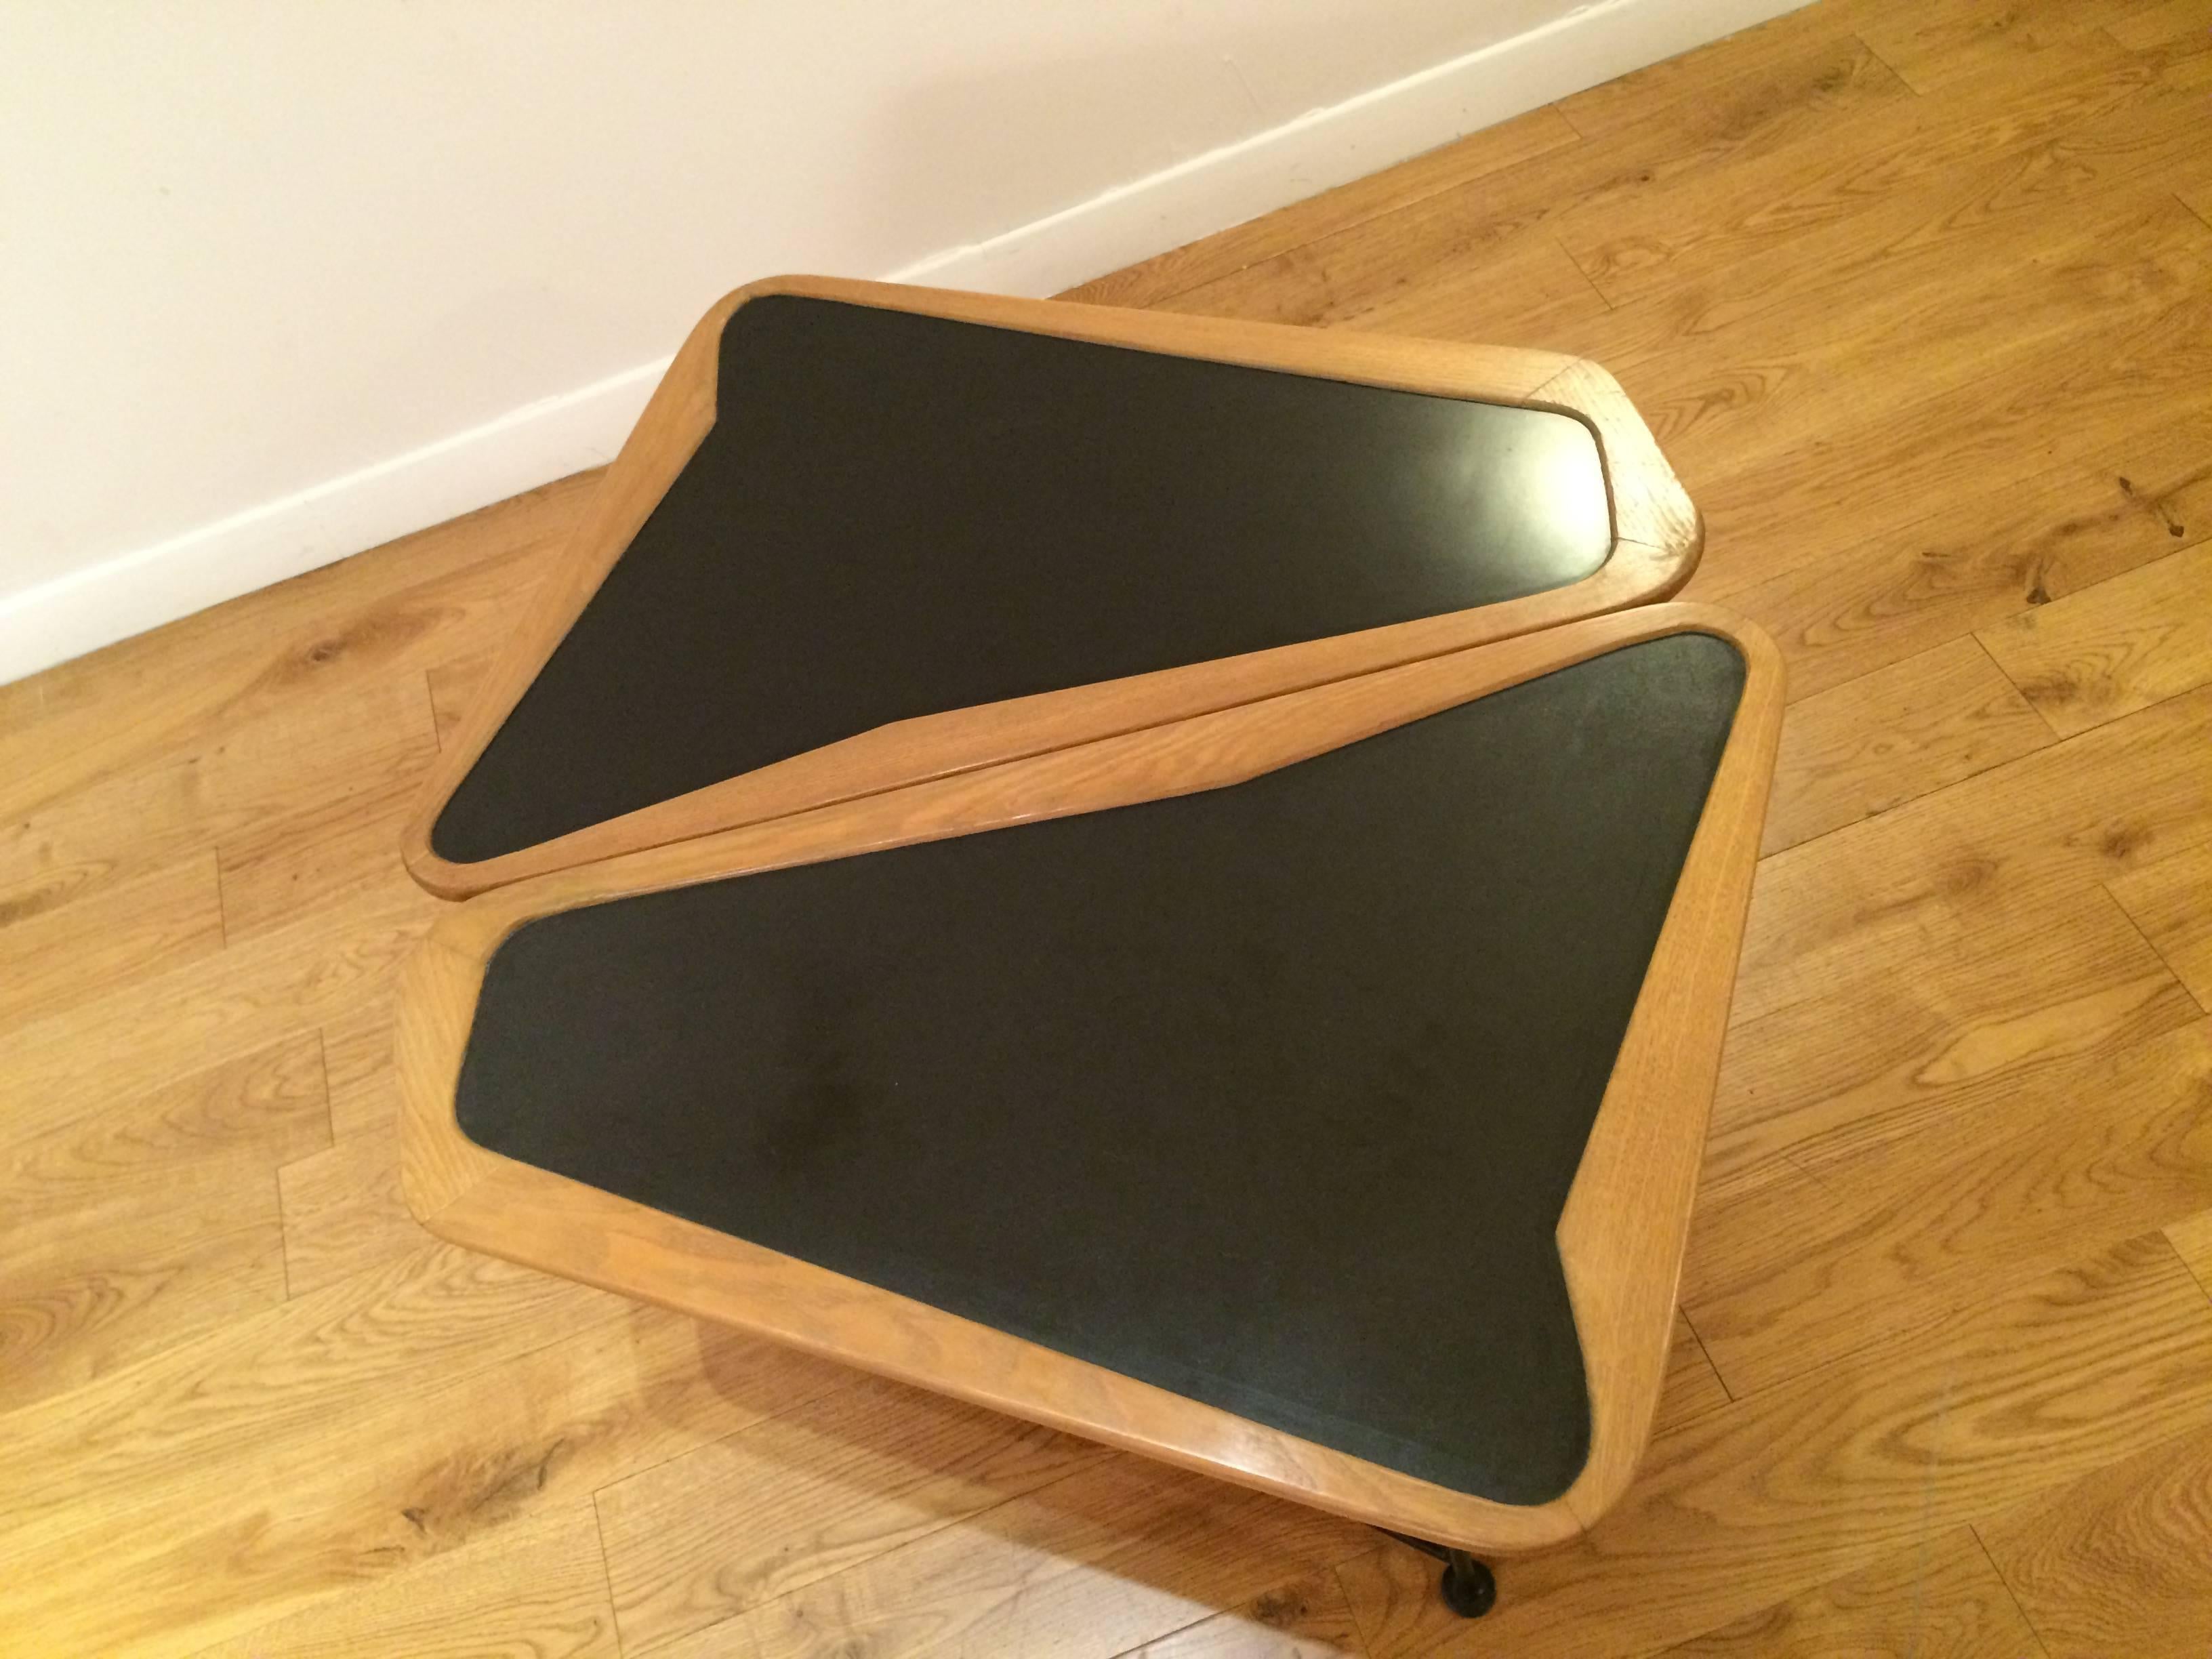 Set of two coffee table made in ash and black formica for the top,
black metal legs, designed by Charles Ramos and edited by Castanaletta in 1955

